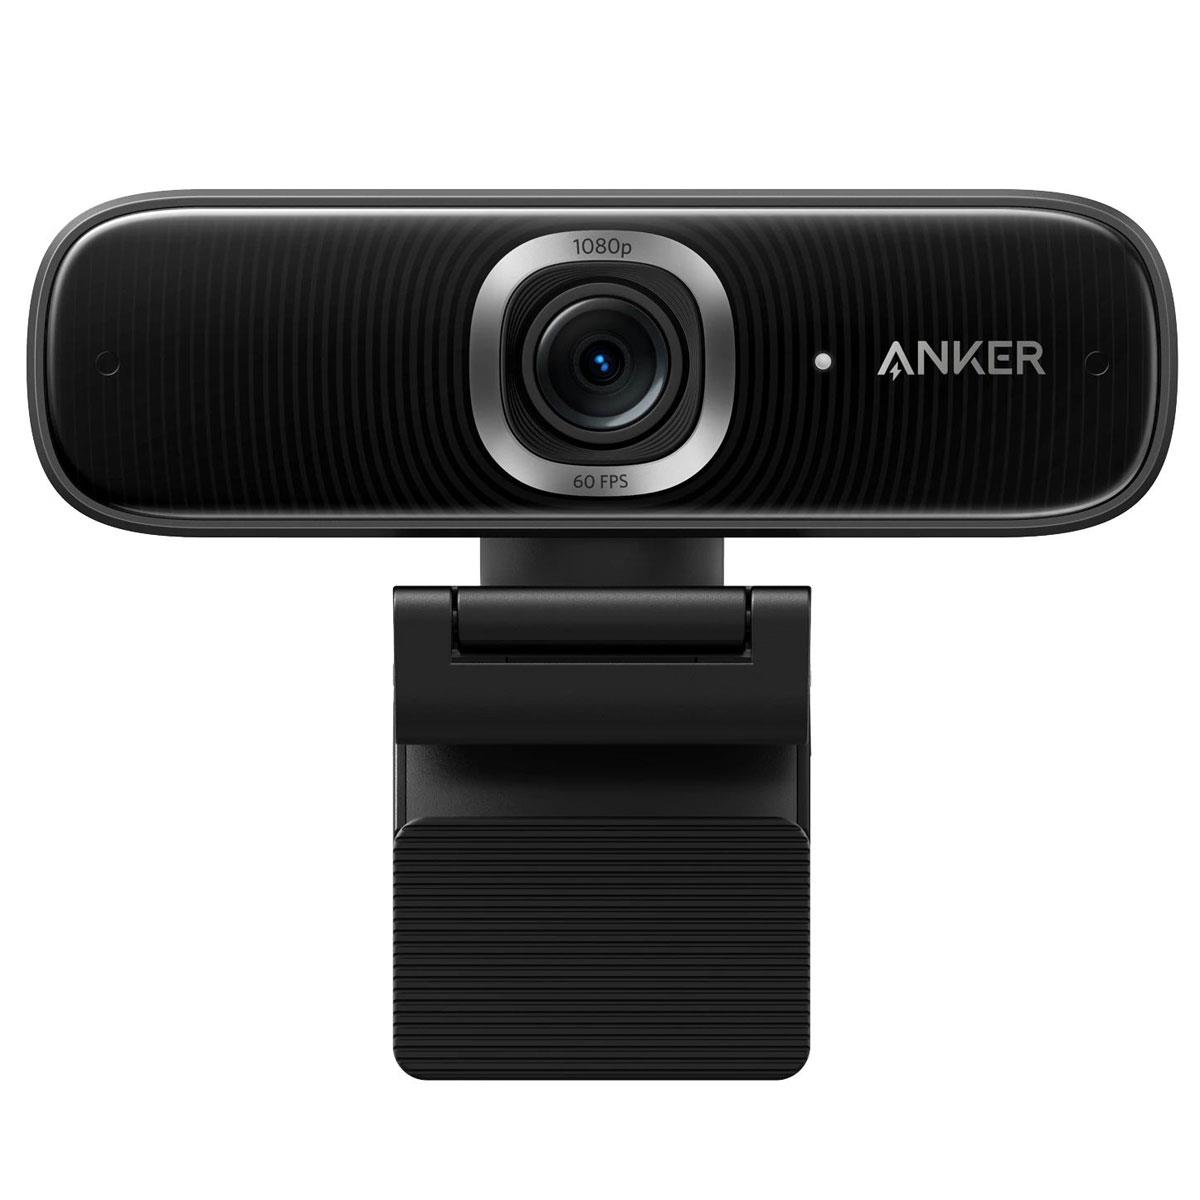 Image of Anker PowerConf C300 2MP CMOS 1080P AI-Powered Webcam with Microphone